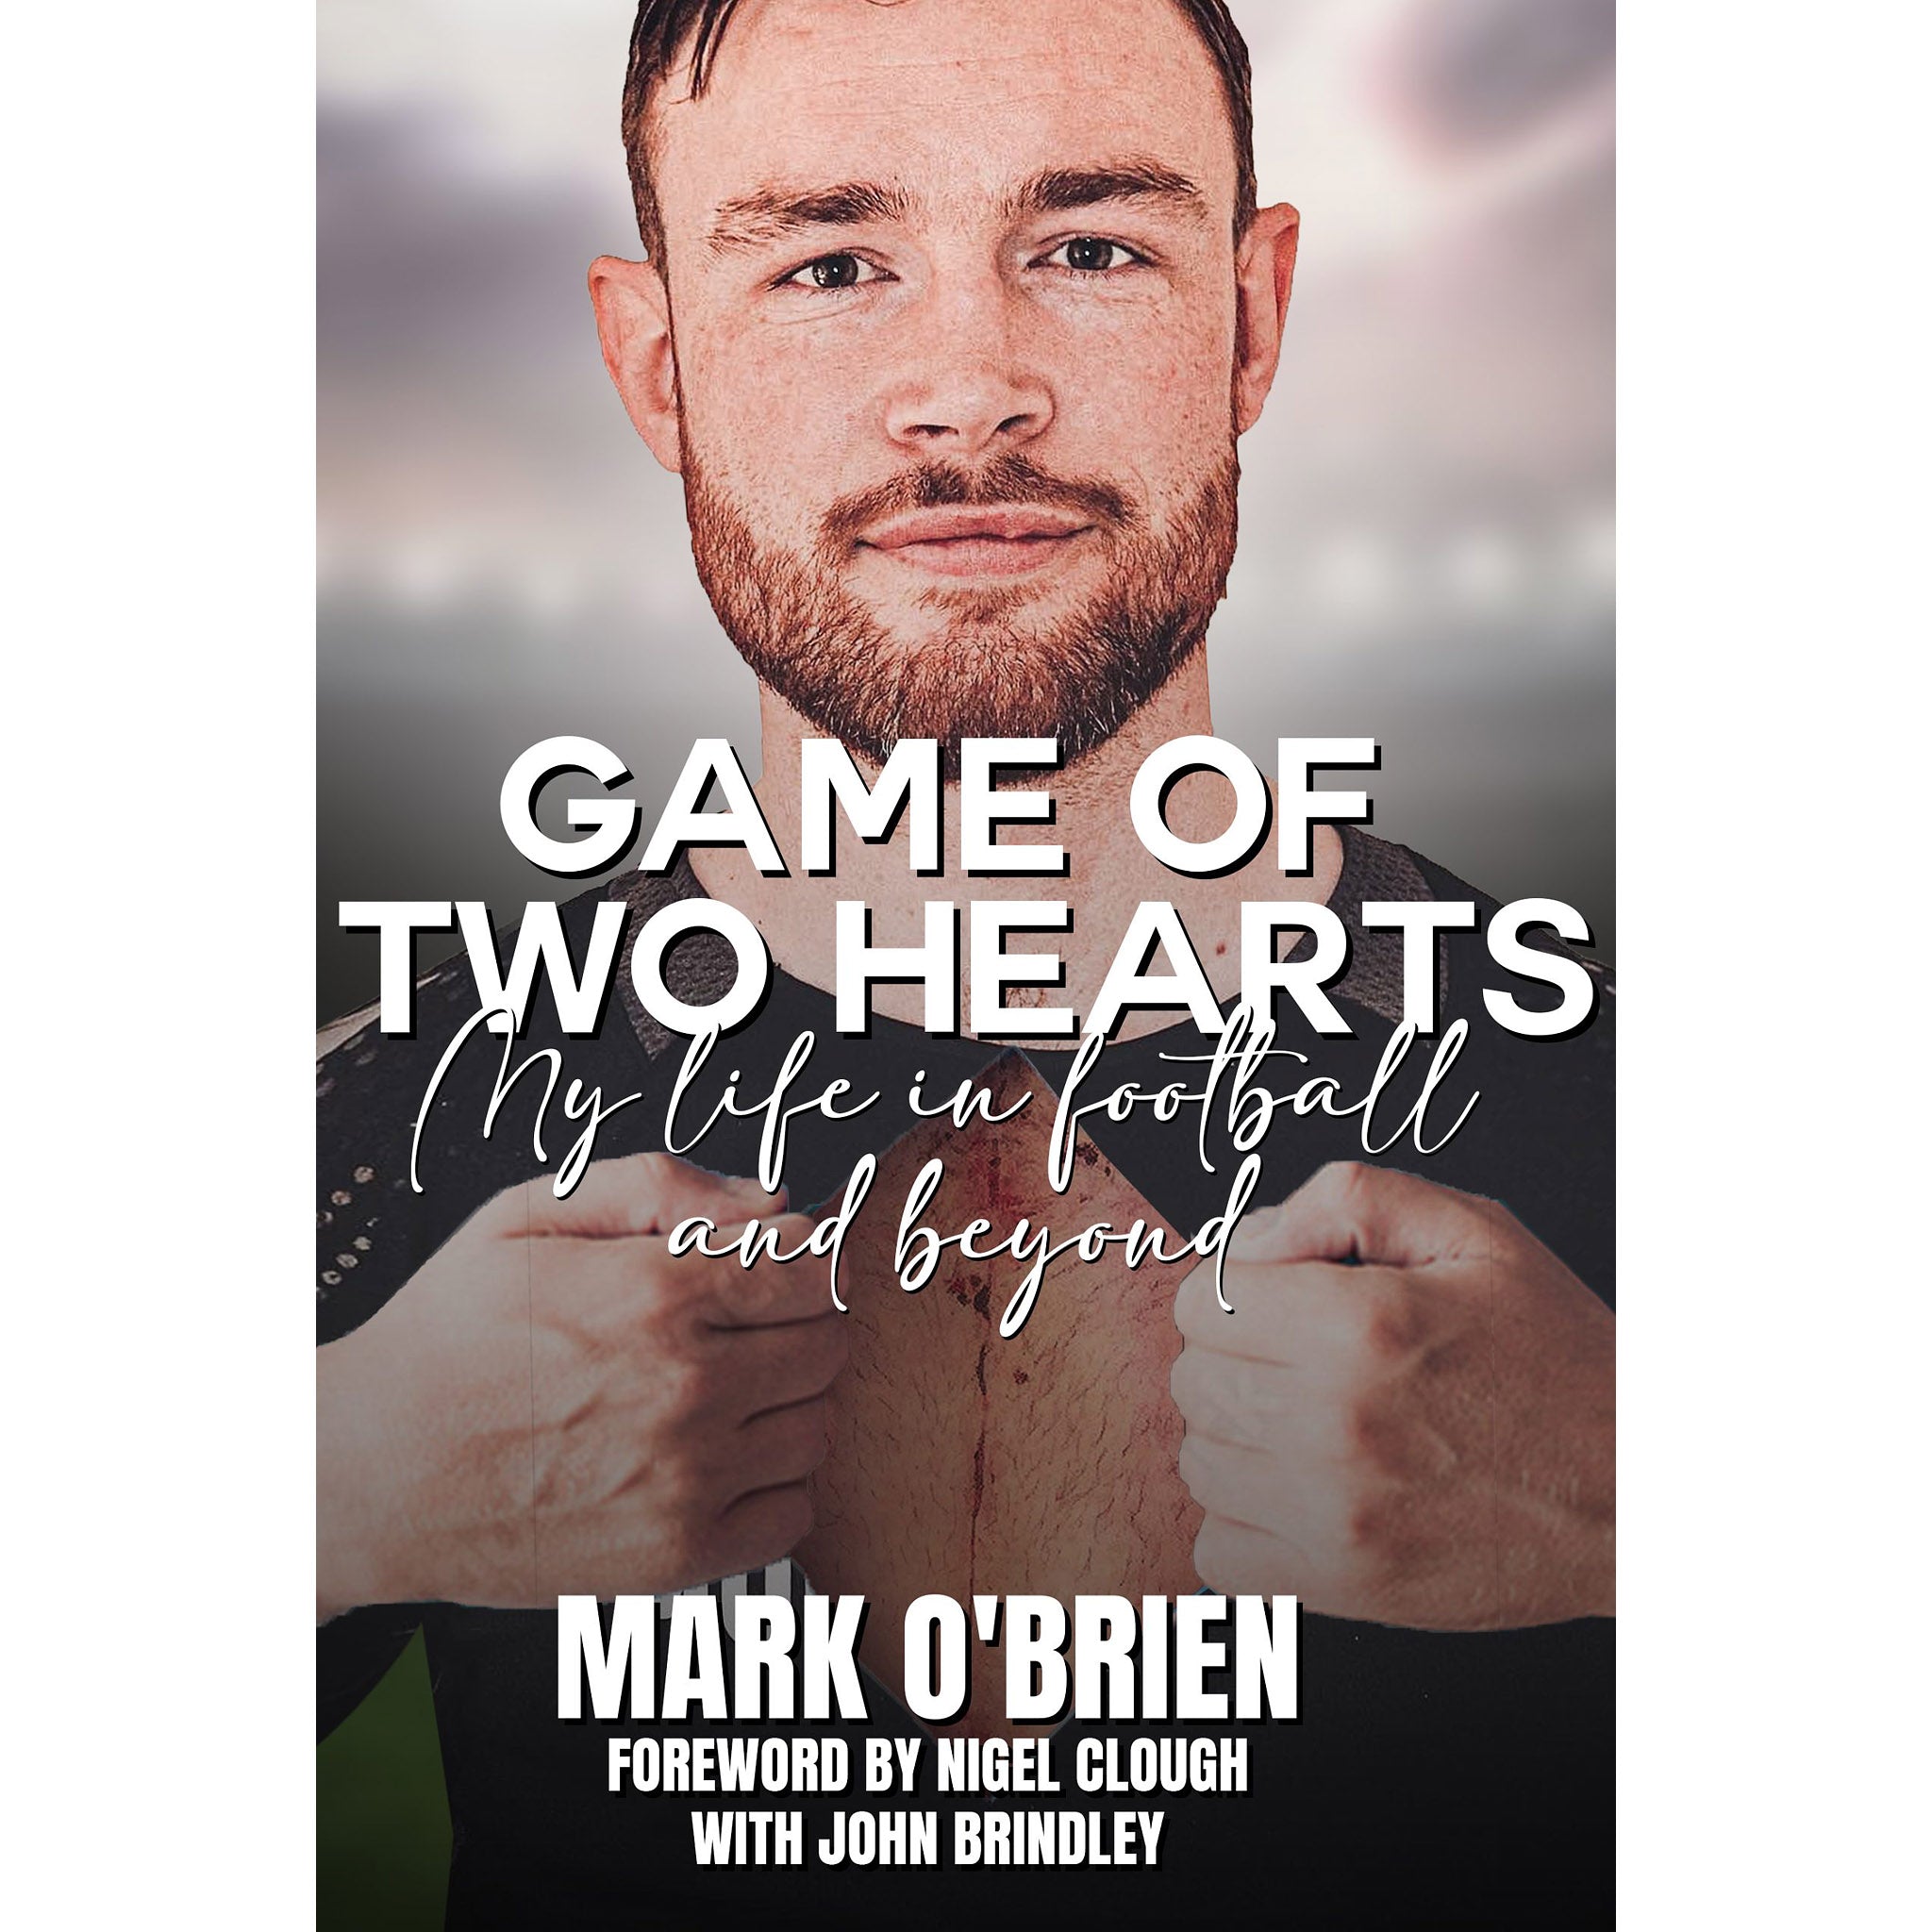 Game of Two Hearts – Mark O'Brien – My life in football and beyond – SIGNED